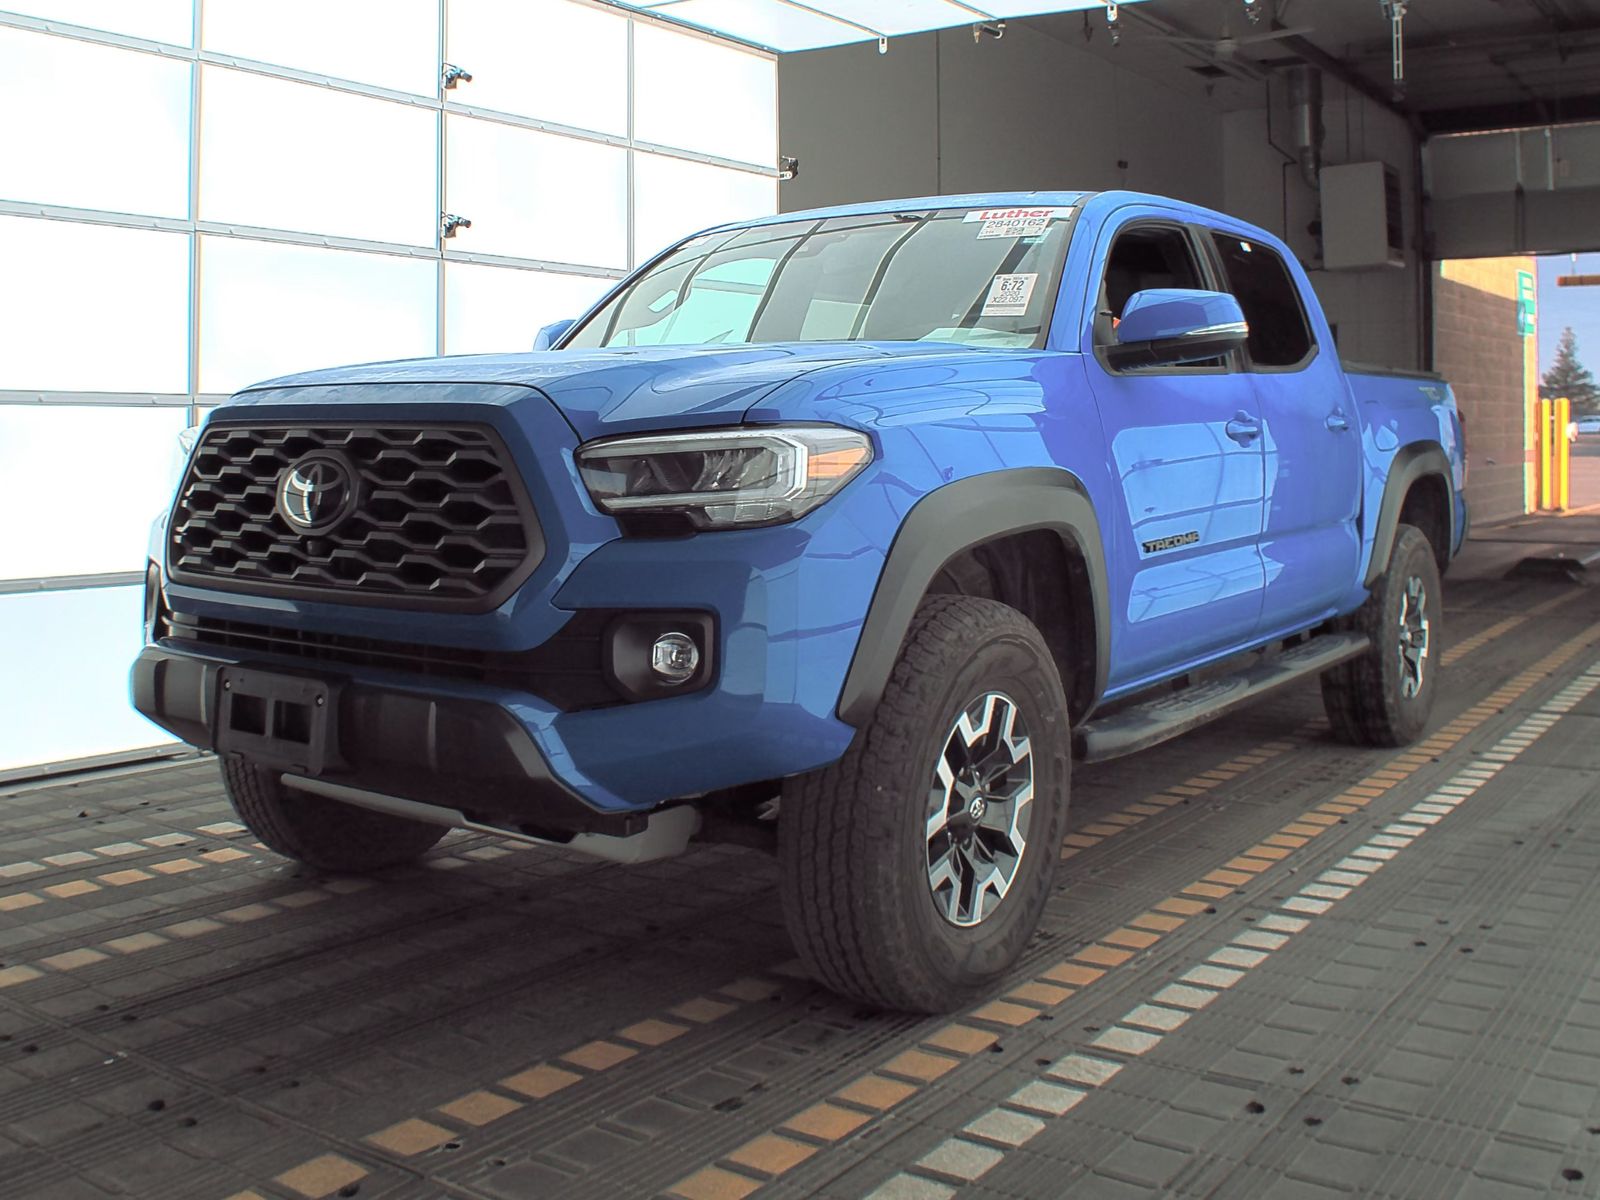 Used 2020 Toyota Tacoma TRD Off-Road VIN 5TFCZ5AN0LX242471